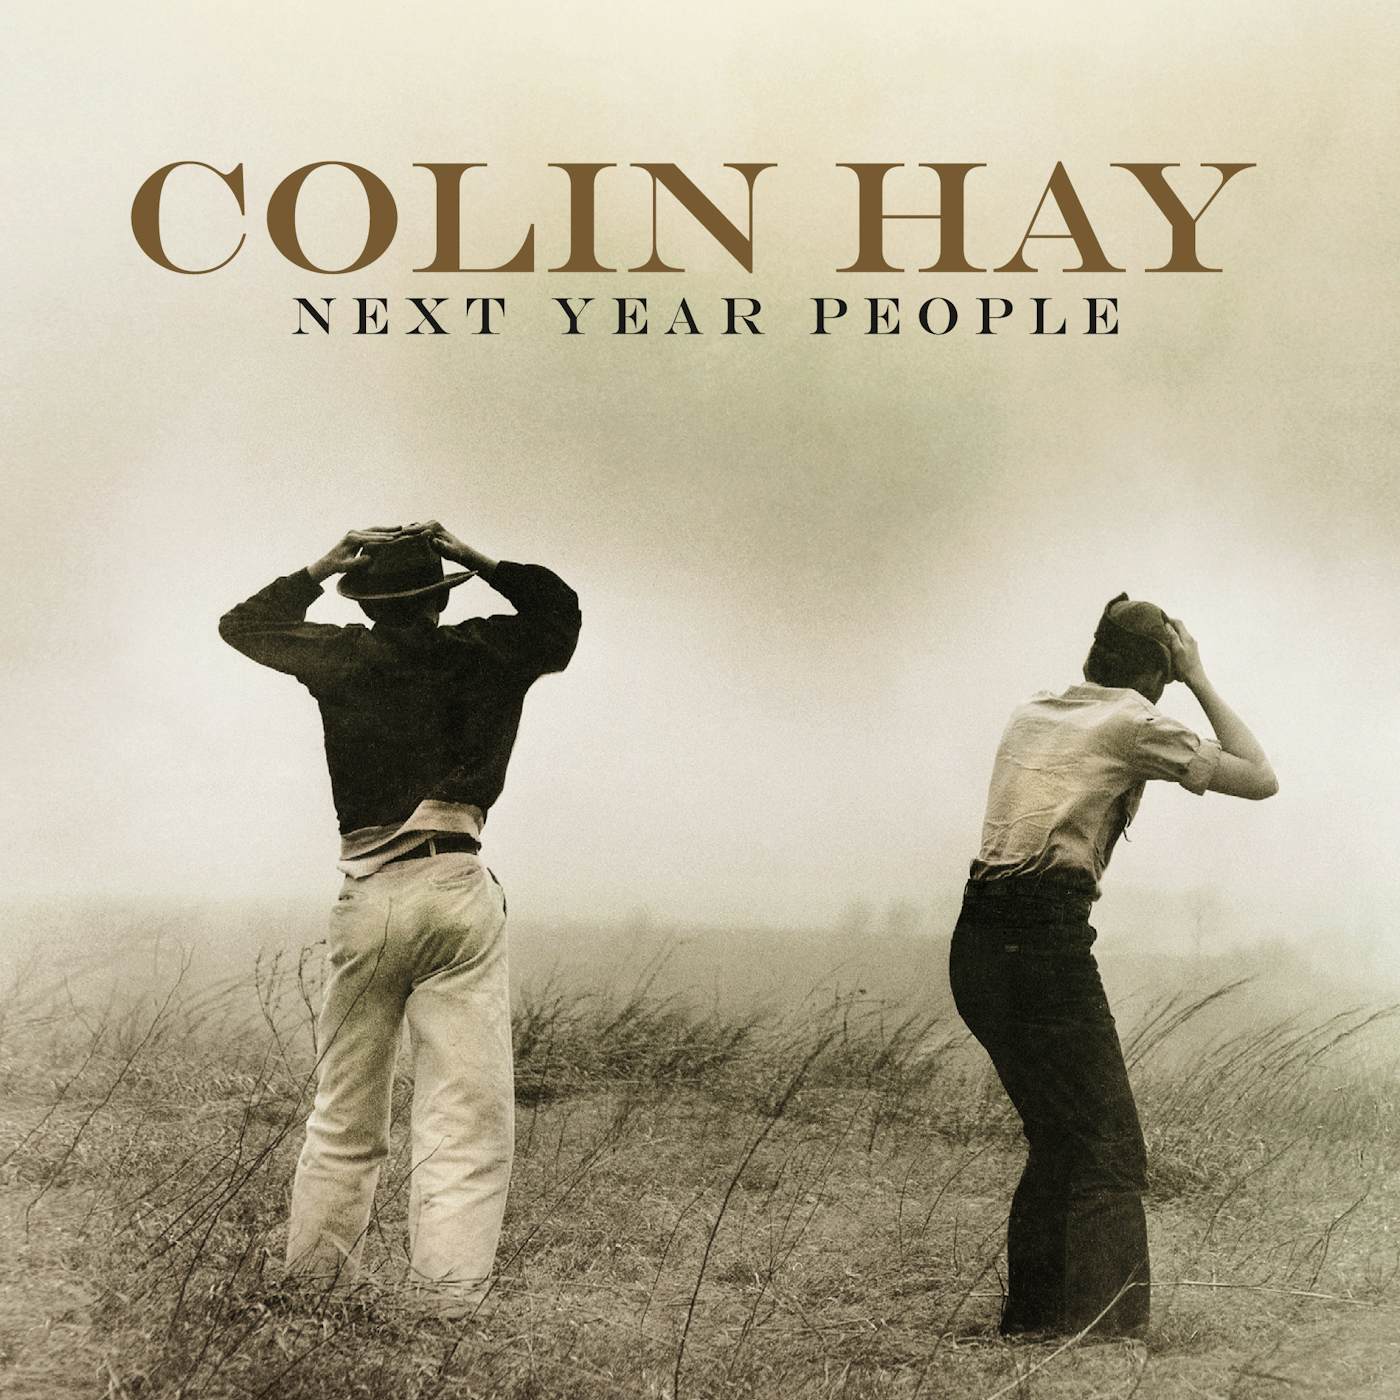 Colin Hay NEXT YEAR PEOPLE CD